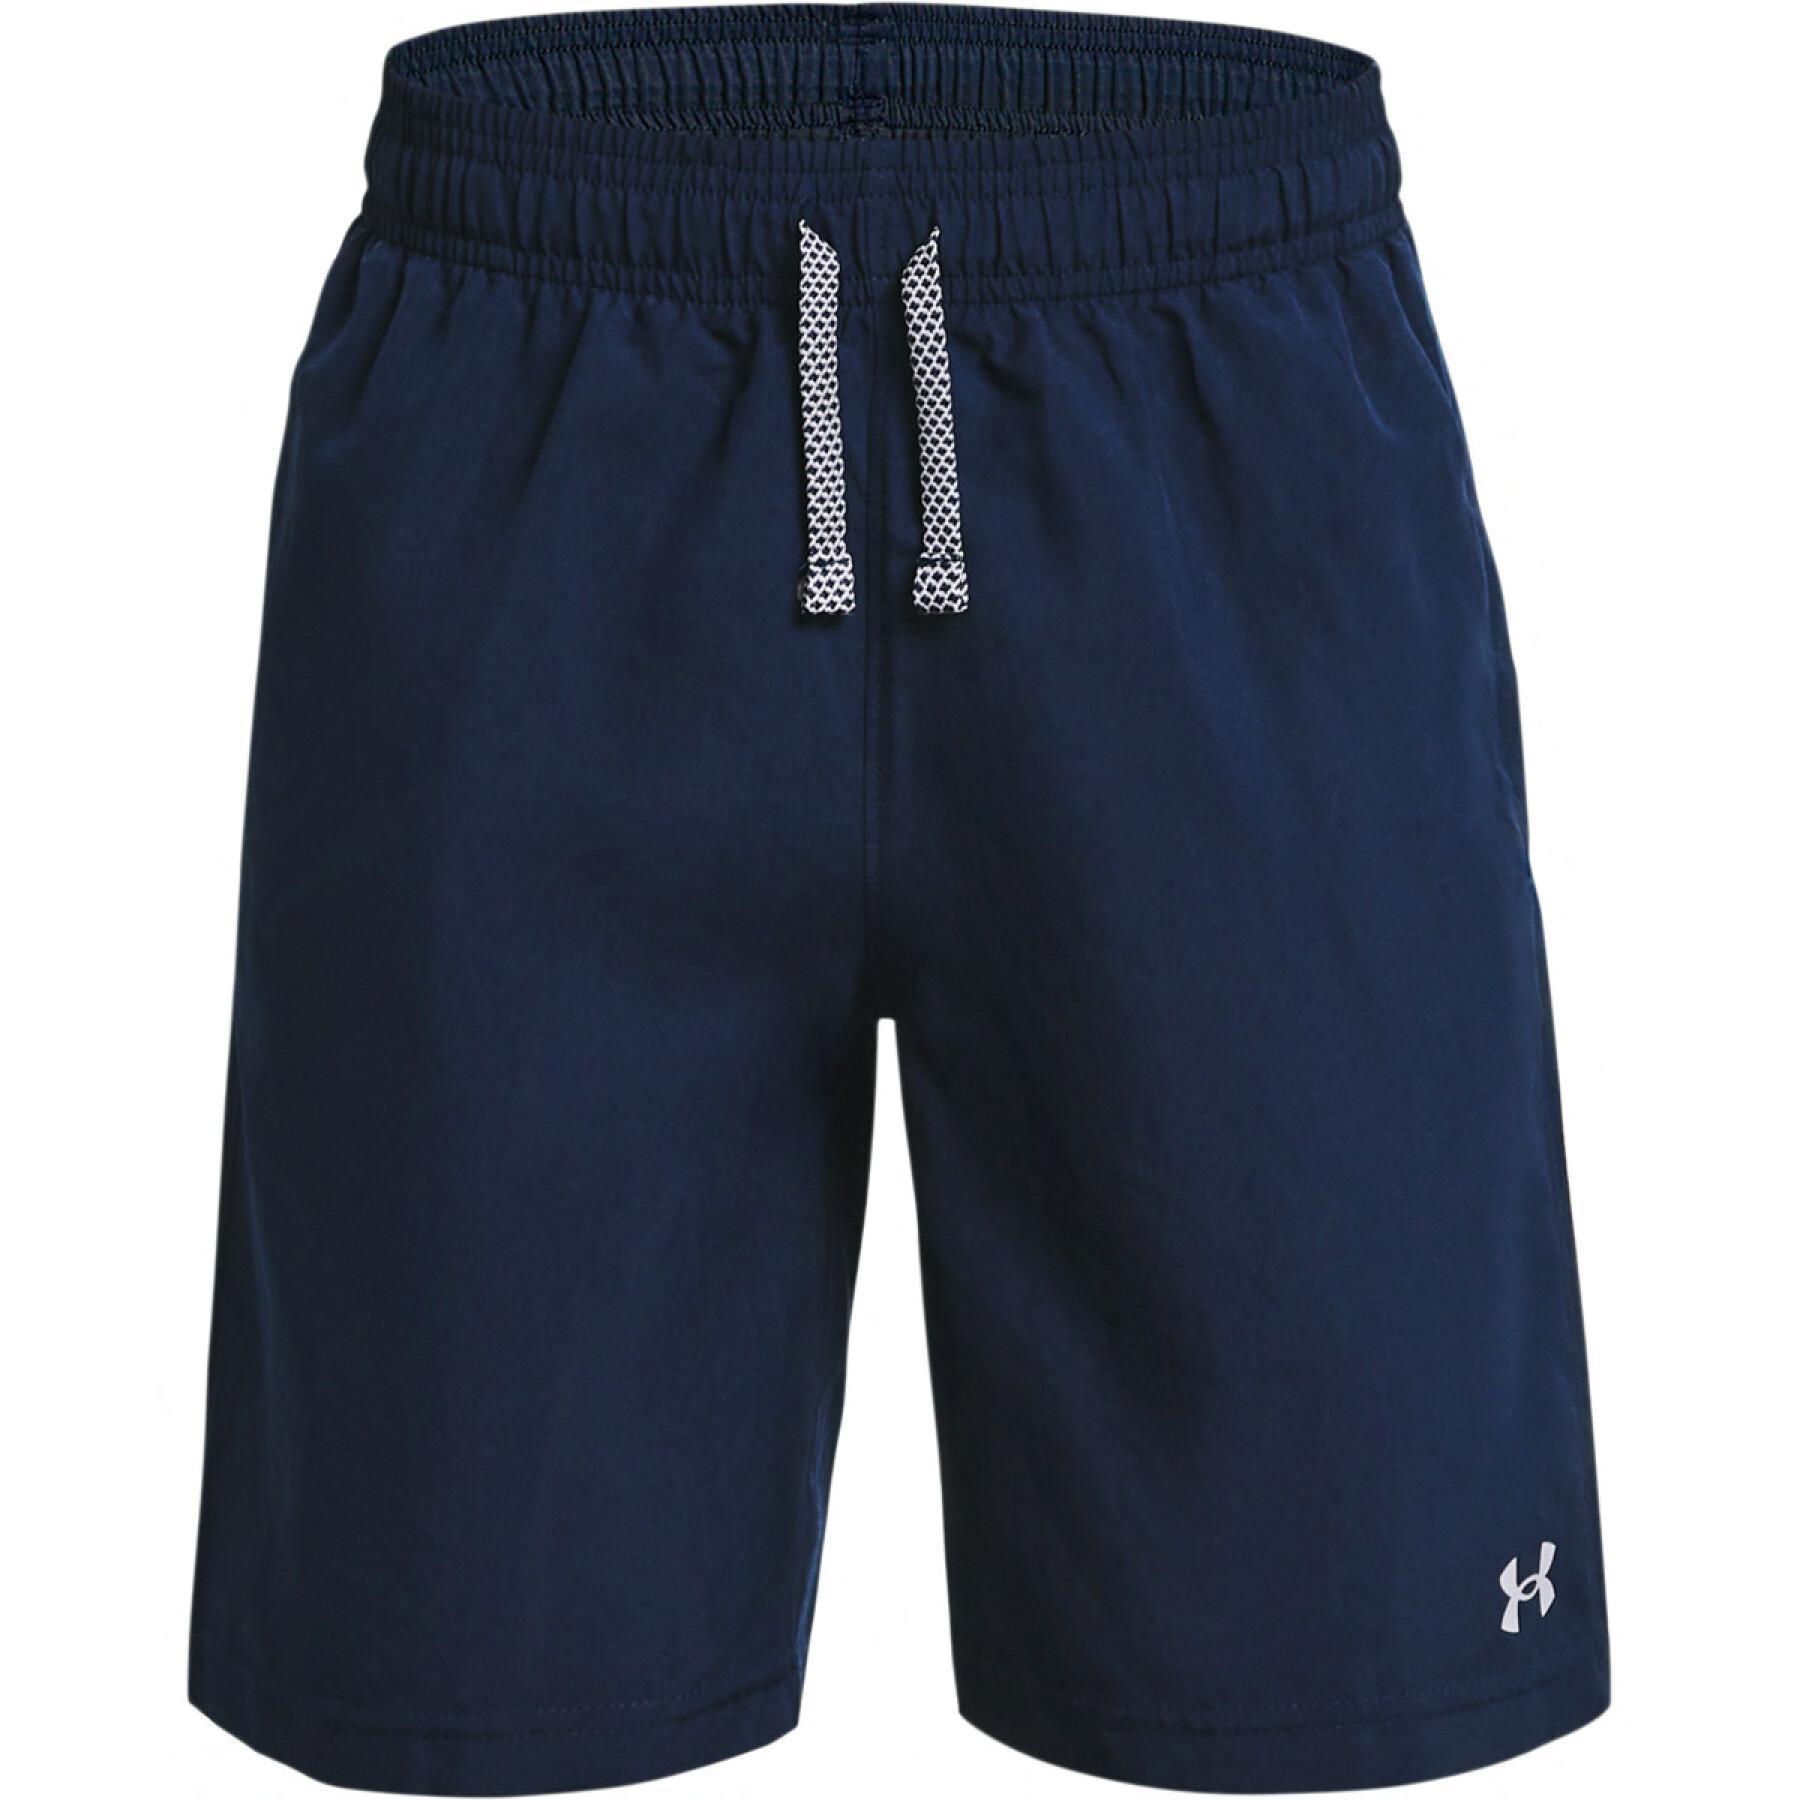 Kinder shorts Under Armour Woven